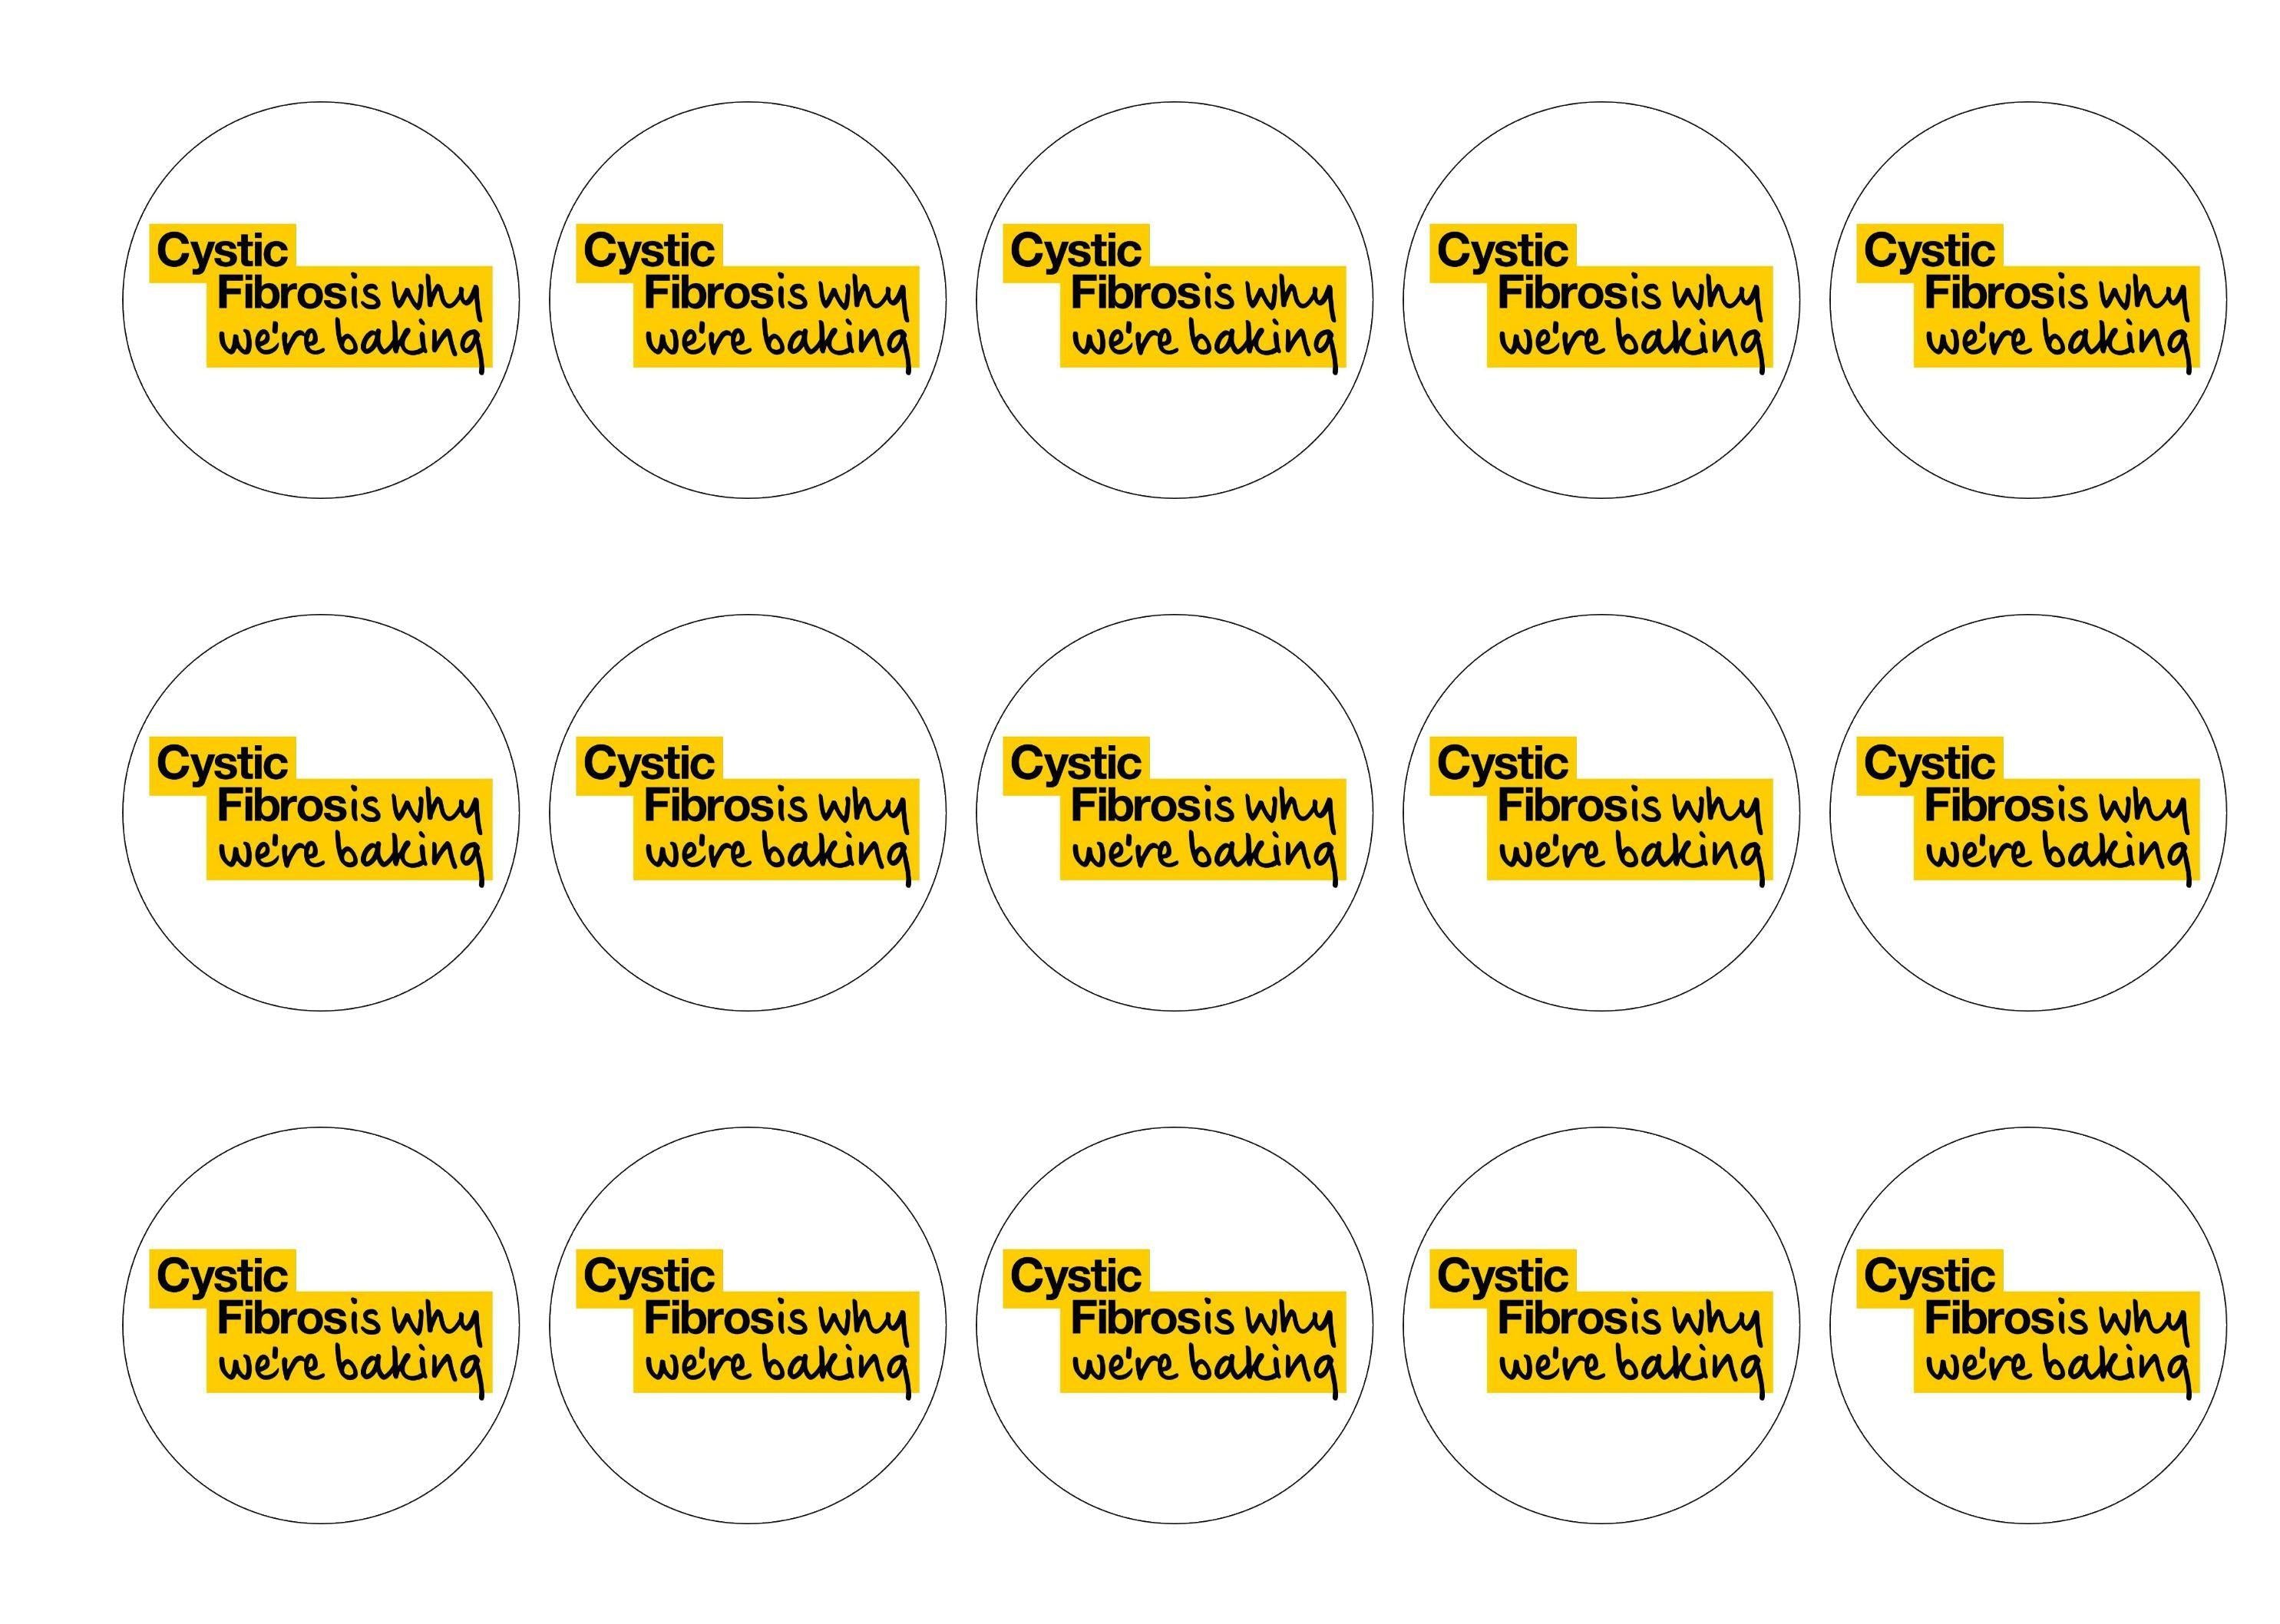 15 printed edible charity cake toppers with the Cystic Fibrosis Trust Why We're Baking logo